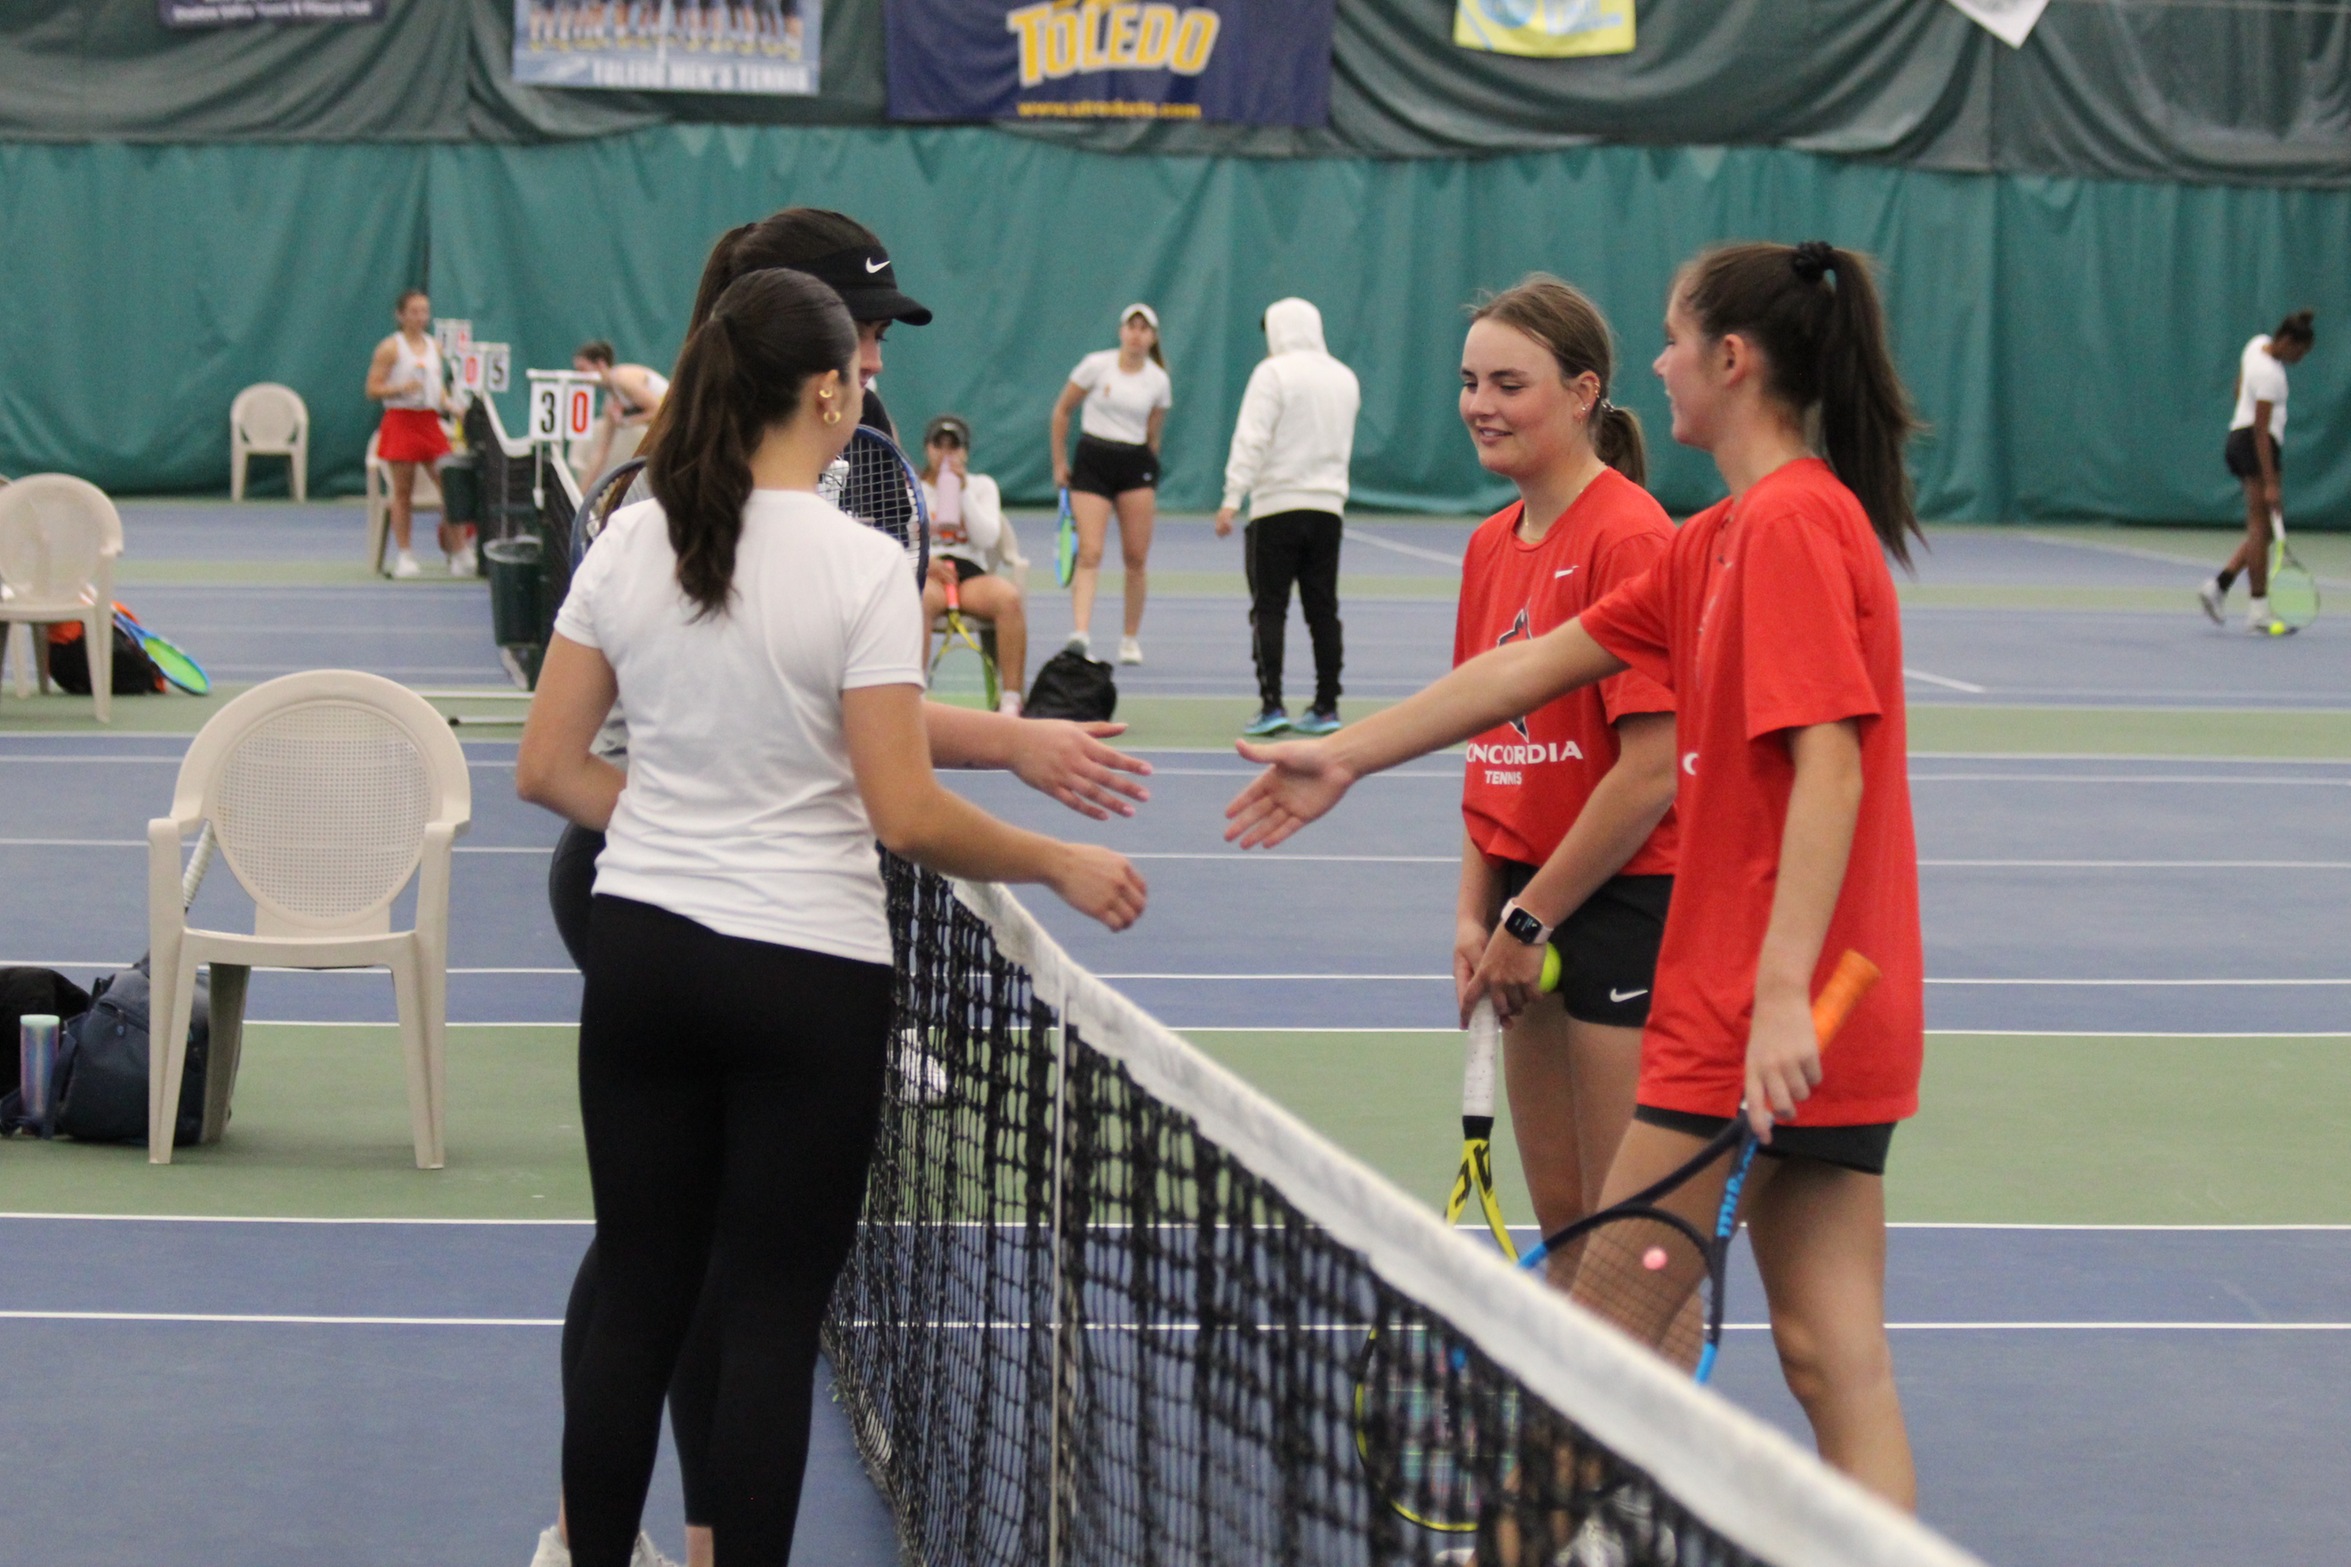 Women's Tennis bows out of WHAC Tournament to conclude their season